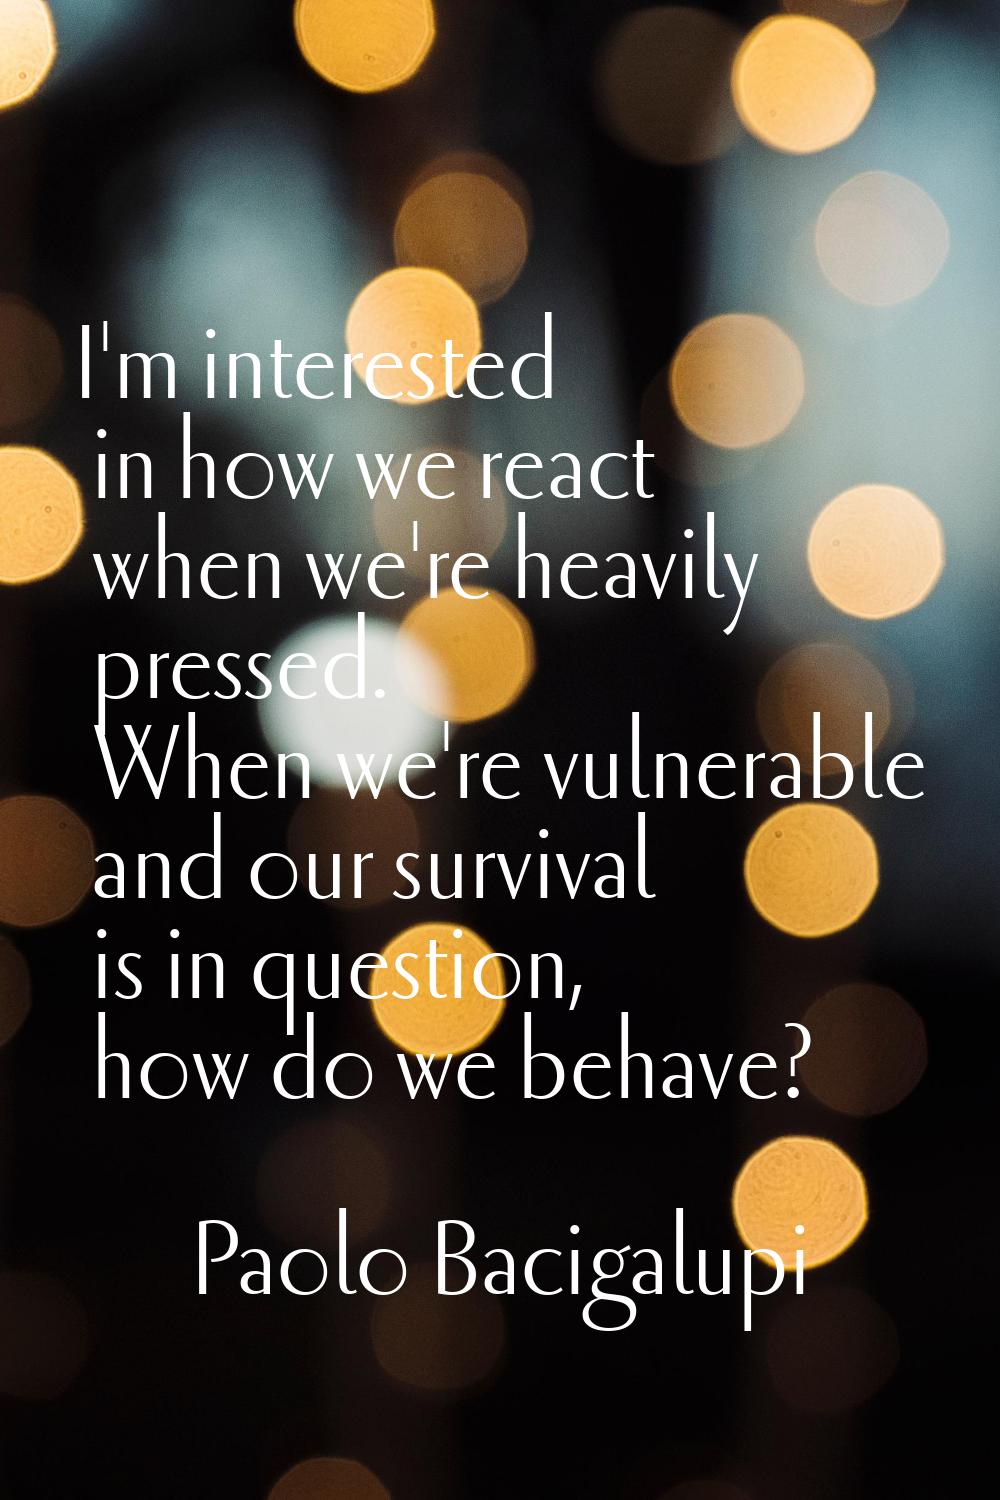 I'm interested in how we react when we're heavily pressed. When we're vulnerable and our survival i